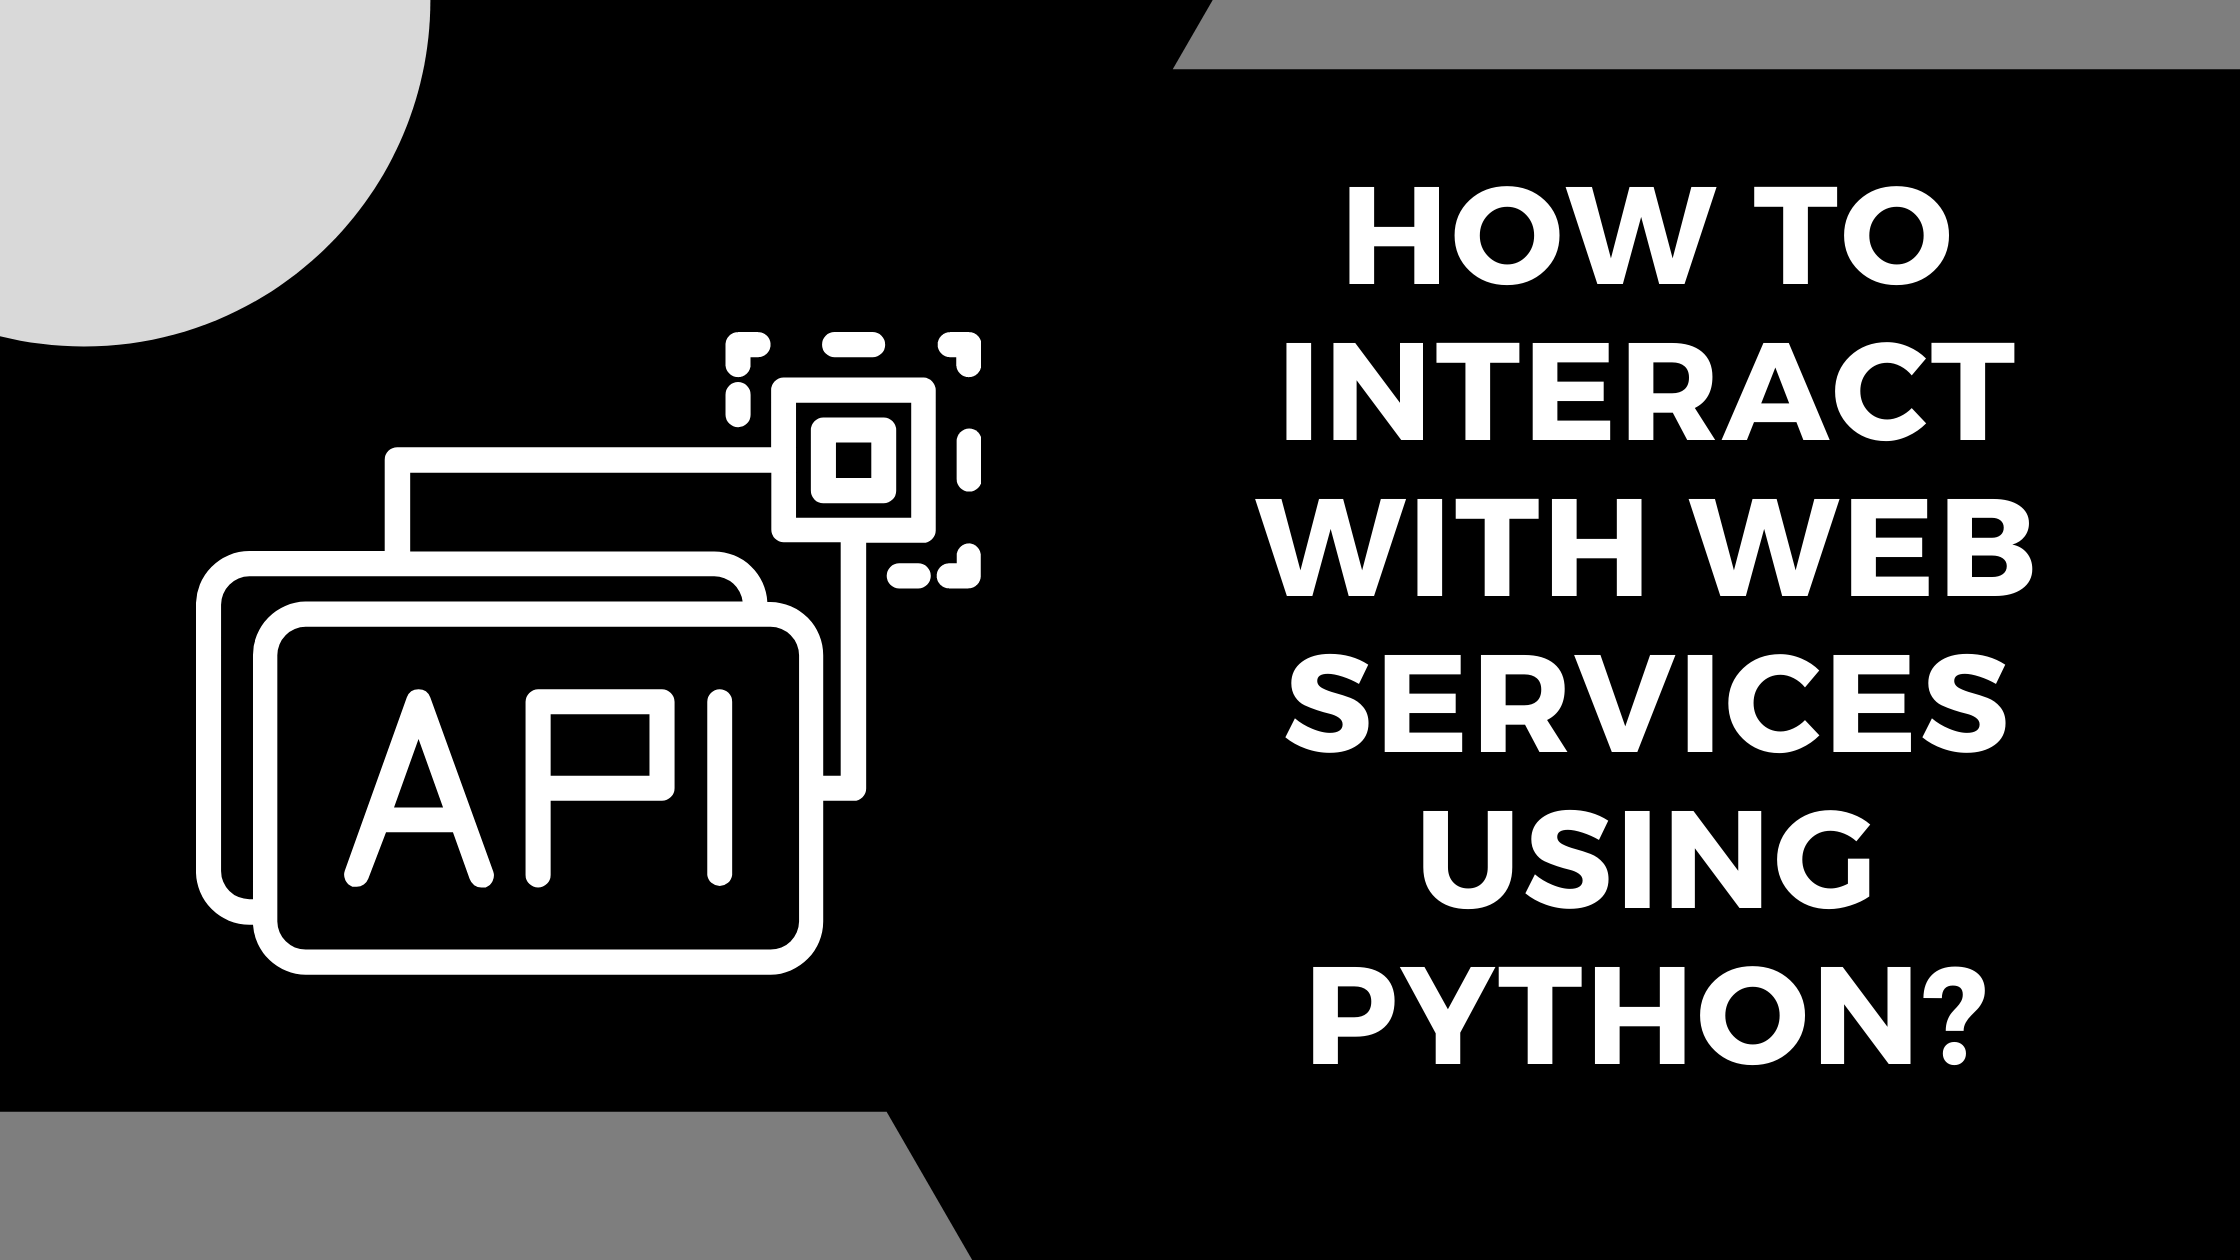 Python Requests – How to Interact with Web Services using Python